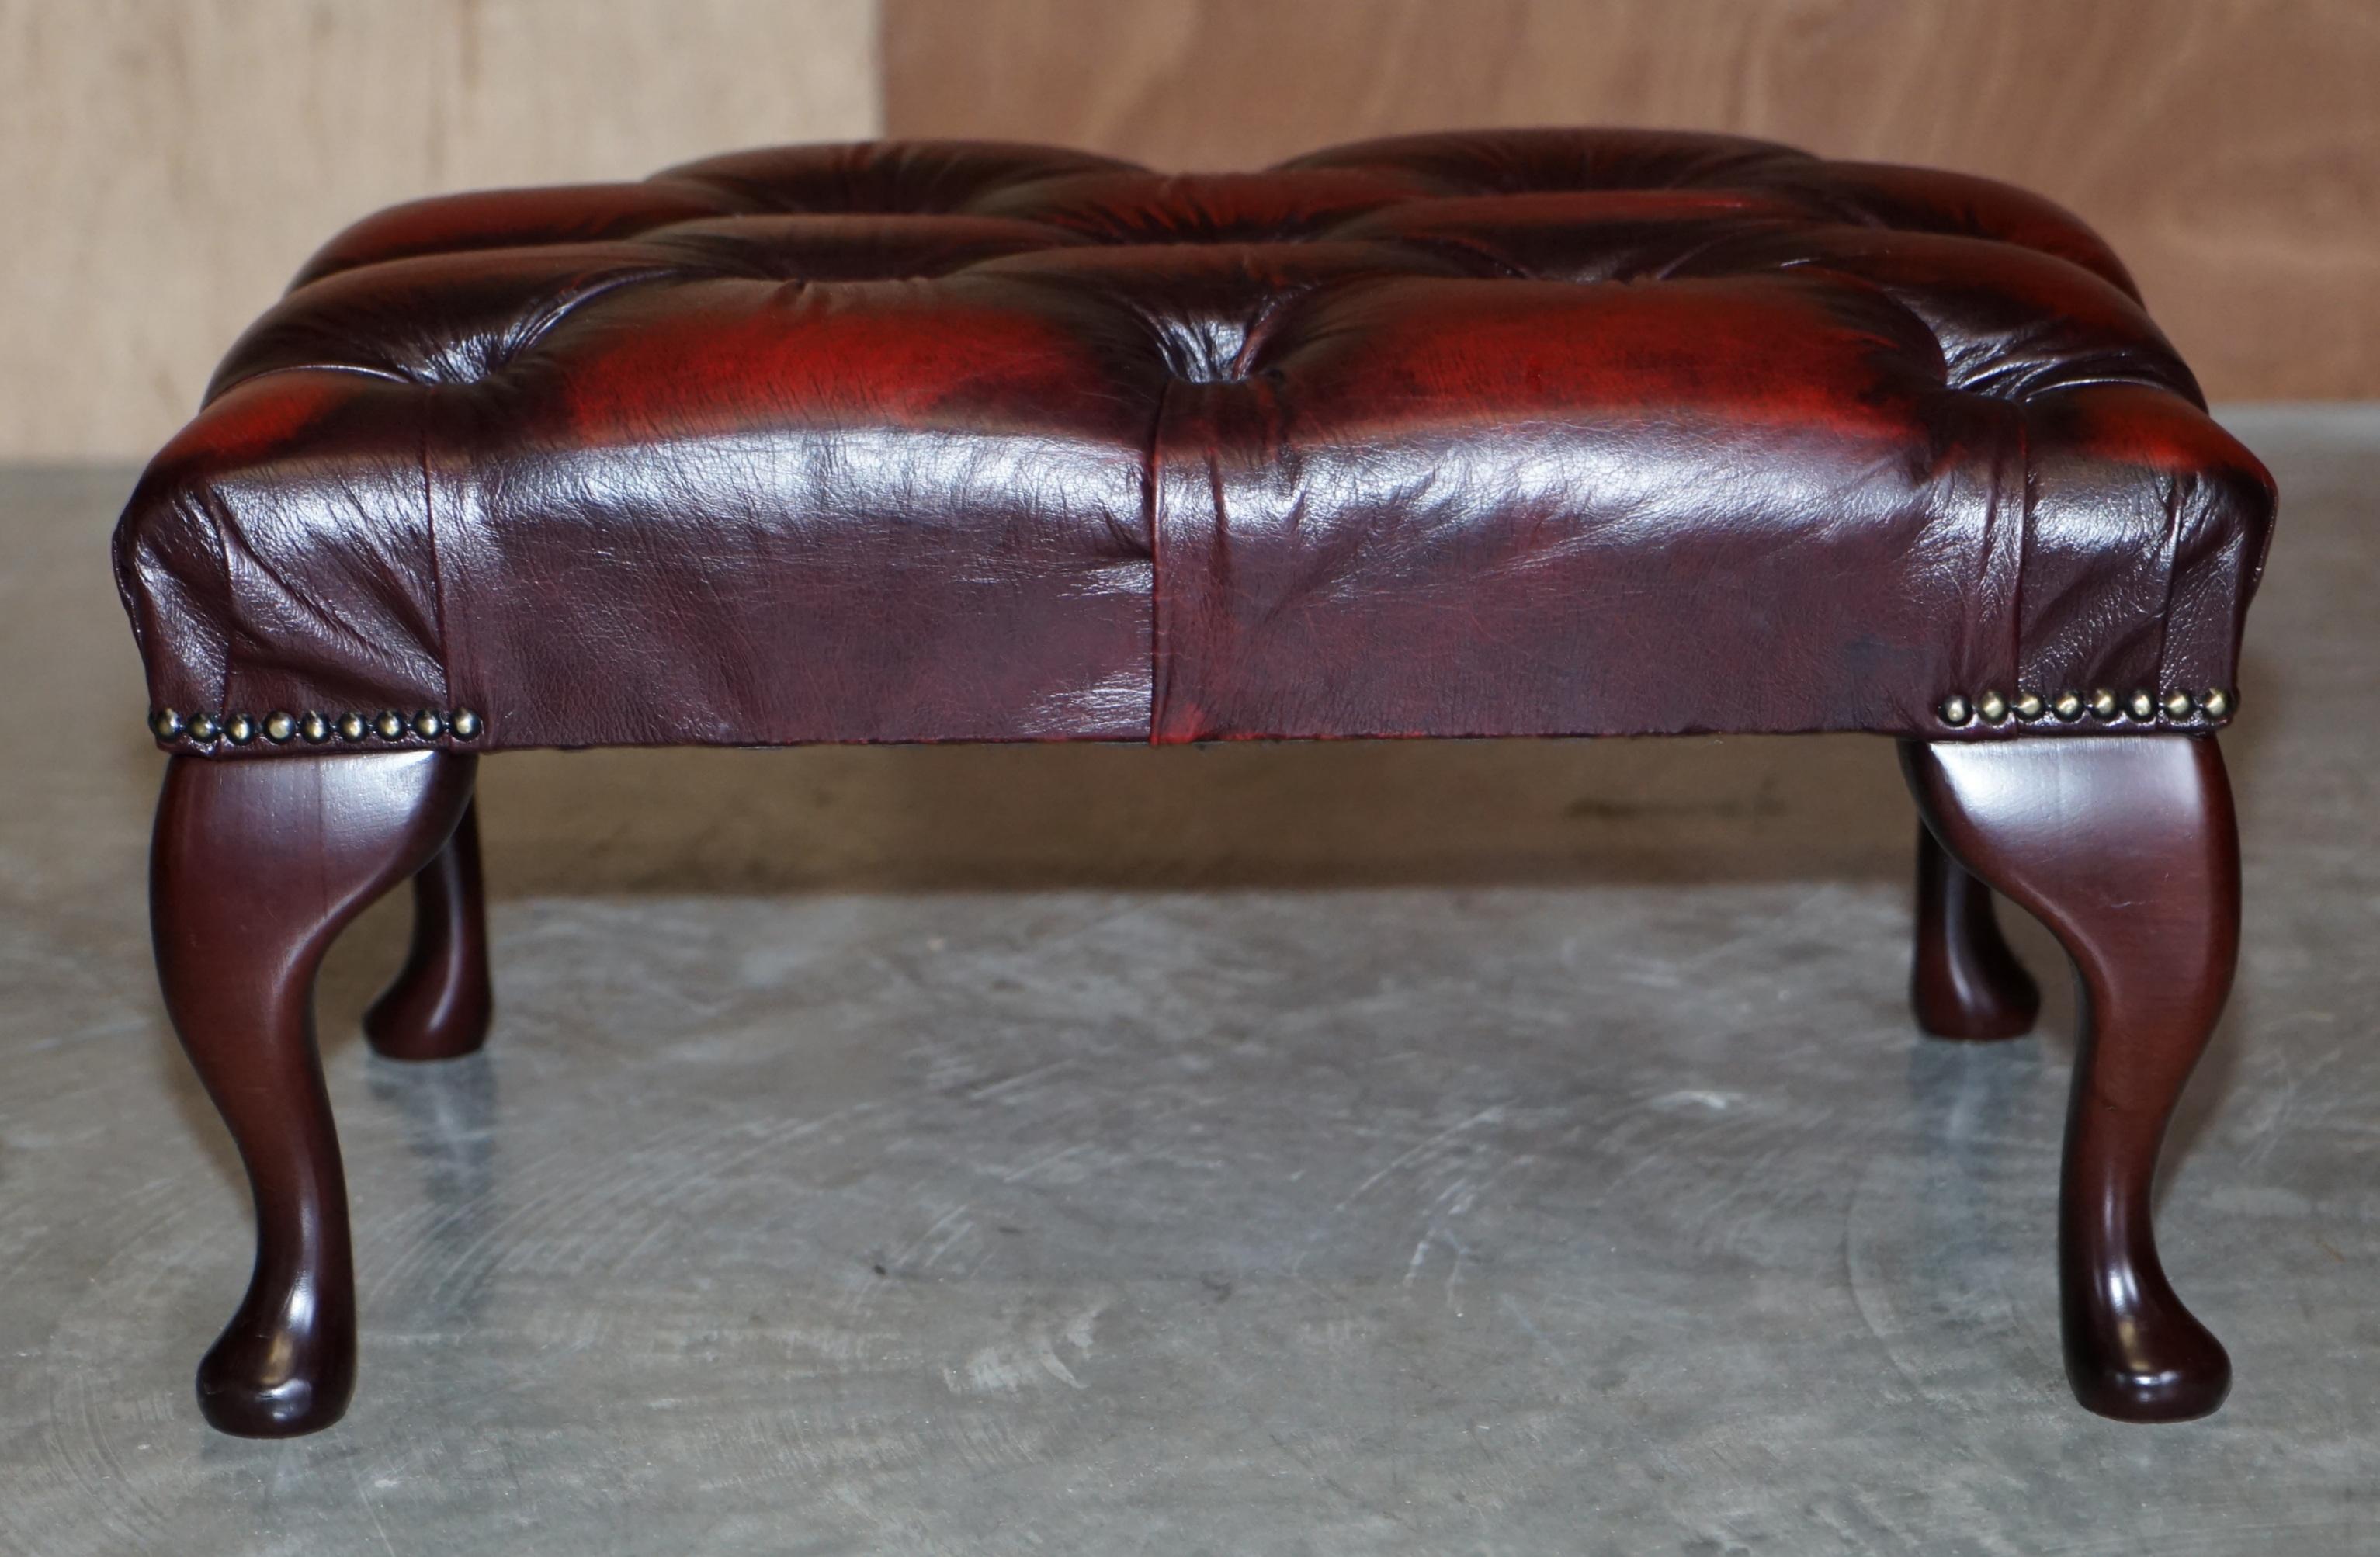 Lovely Oxblood Leather Chesterfield Footstool Ottoman Beech Wood Cabriolet Legs 2